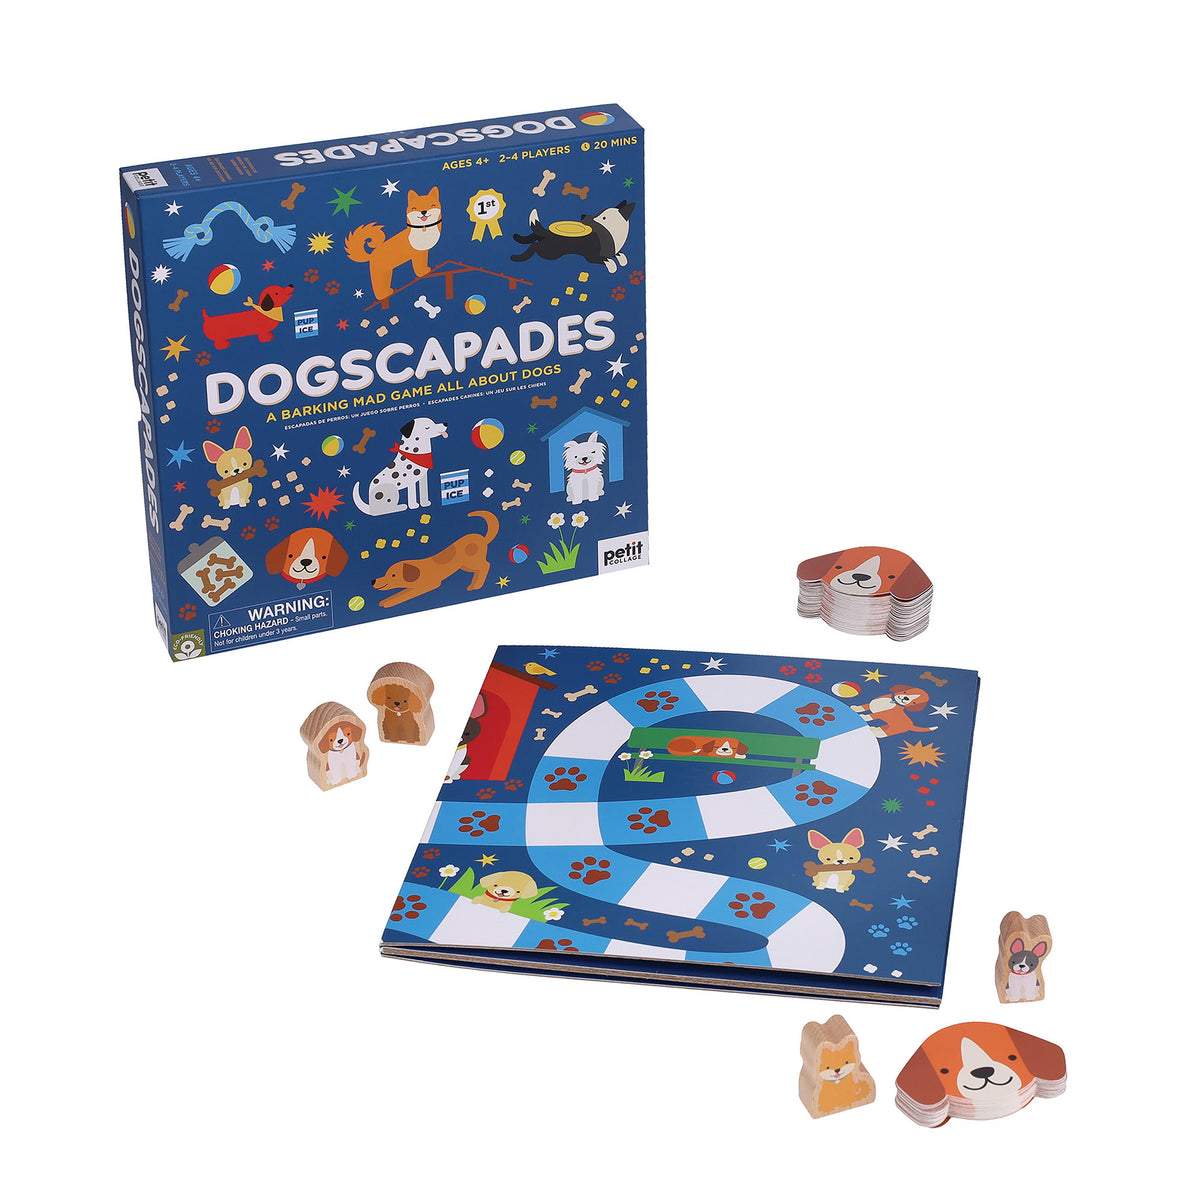 Dogscapades - A Barking Mad Game Blue